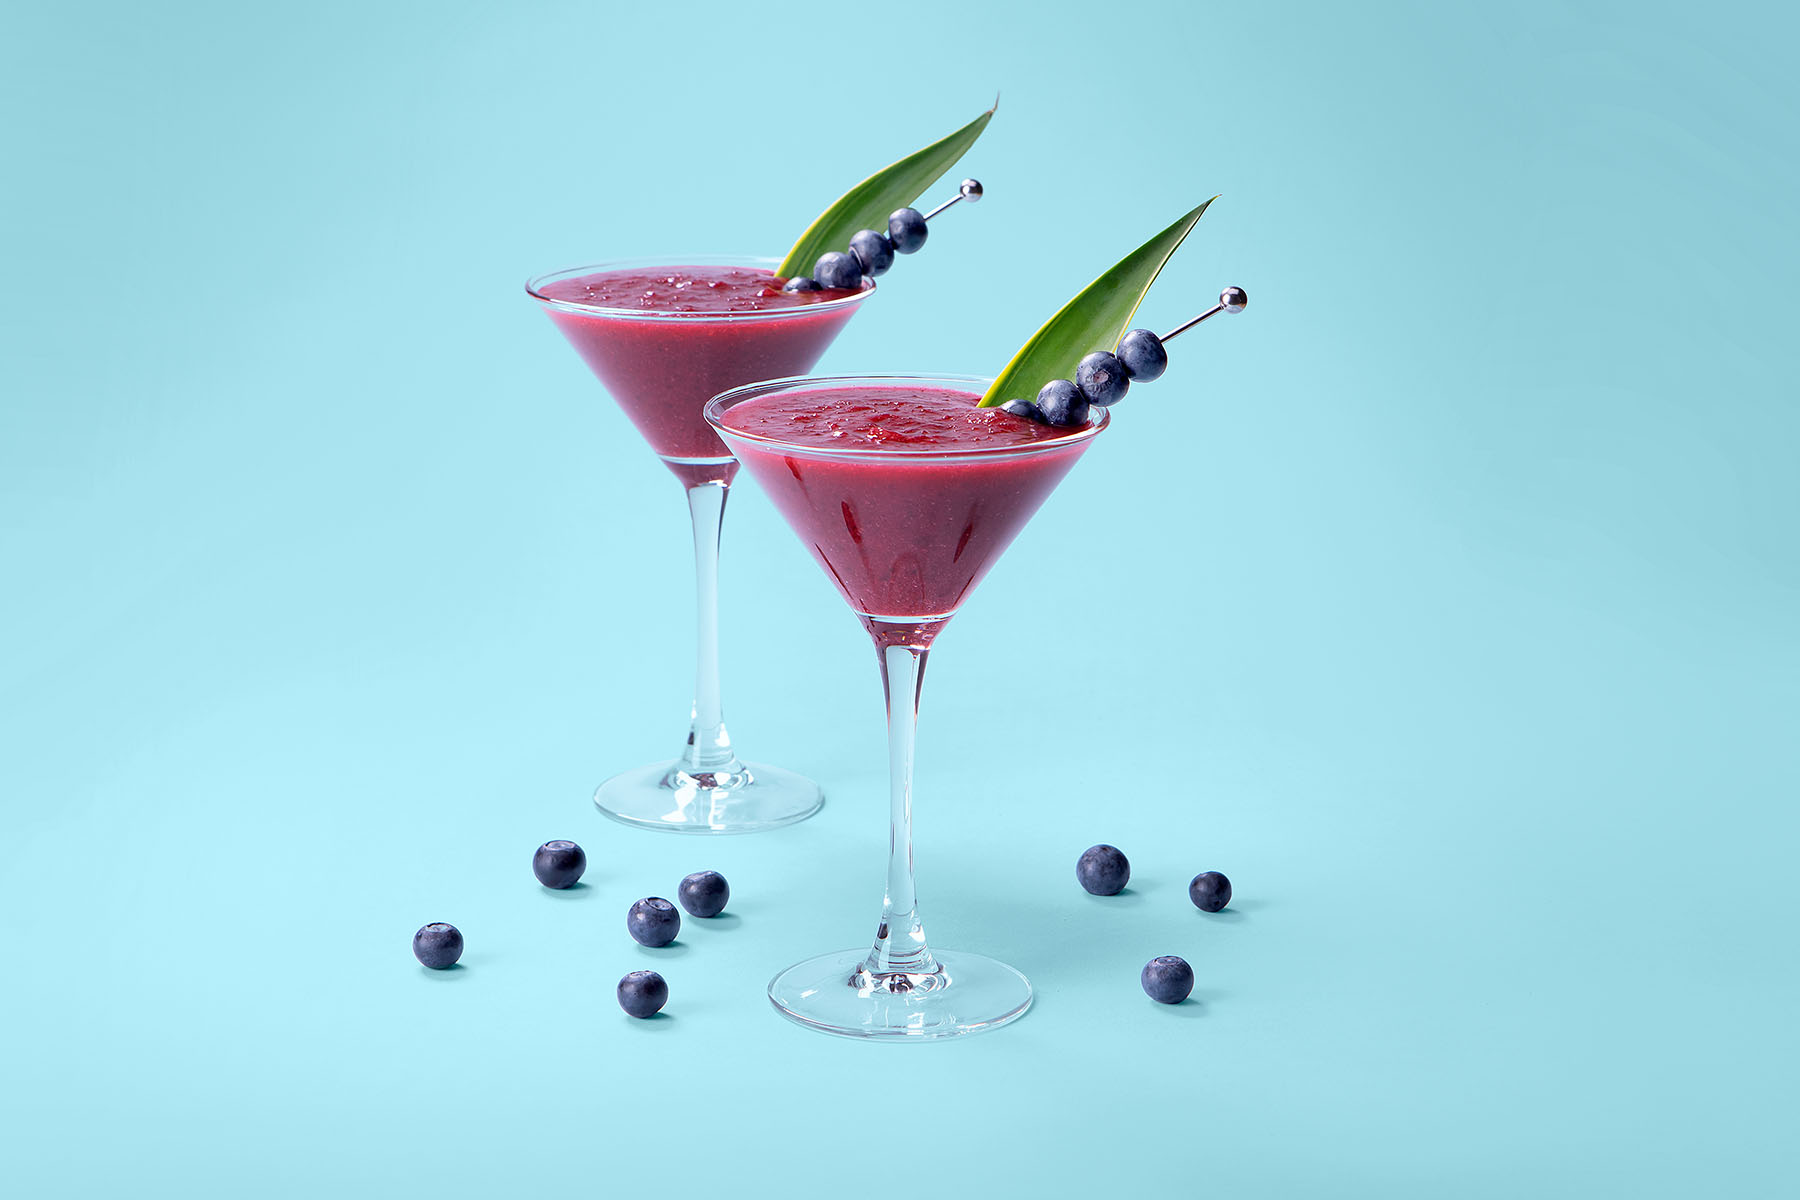 Berry cocktails in martini glasses with blueberry skewers for garnish with blue background